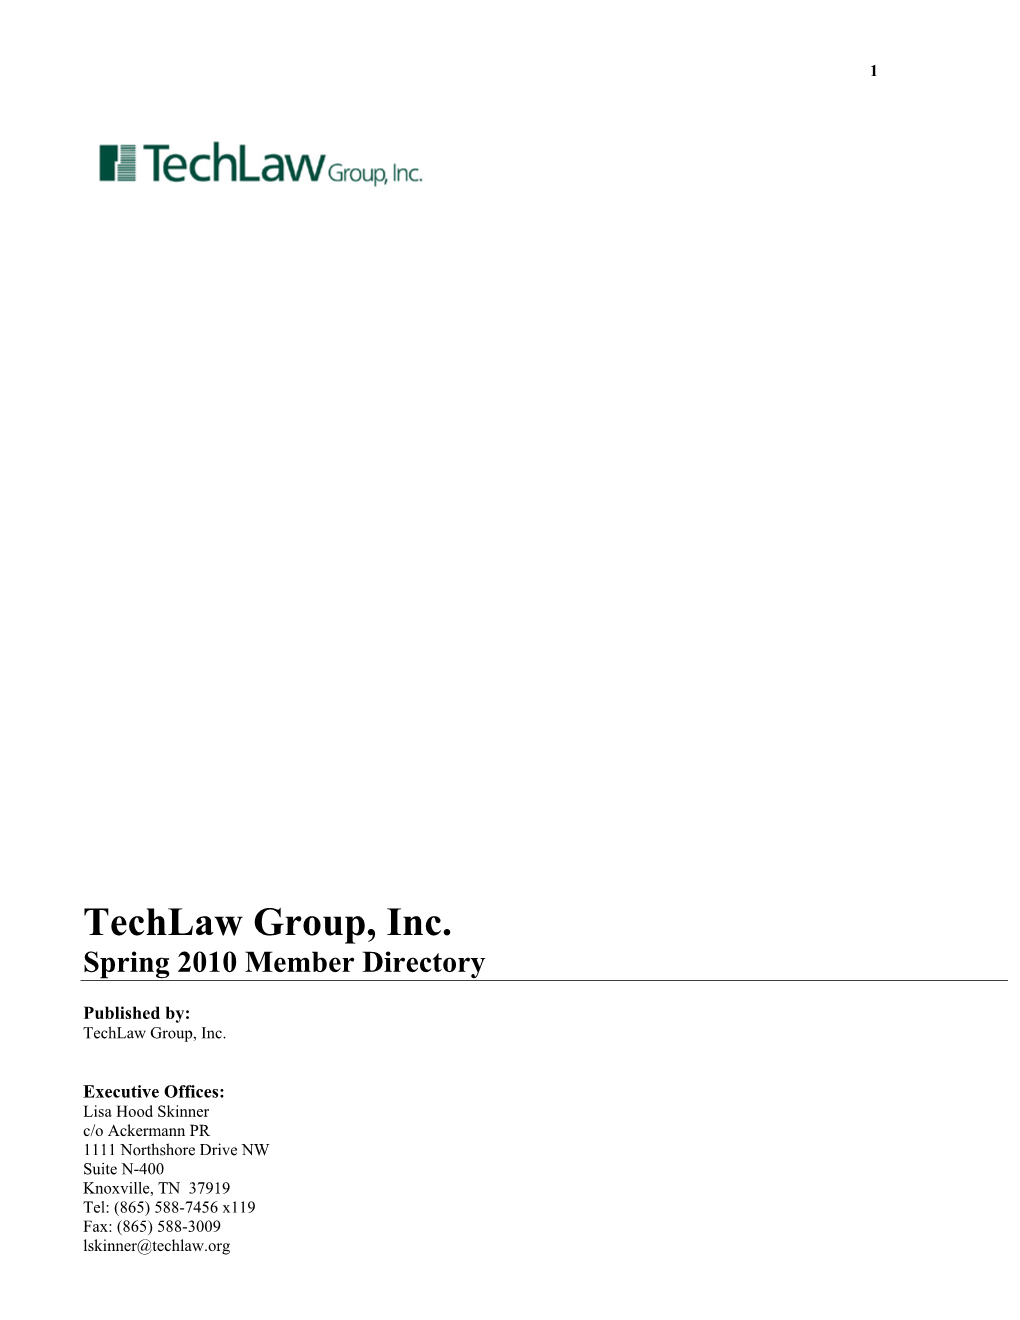 Techlaw Group, Inc. Spring 2010 Member Directory